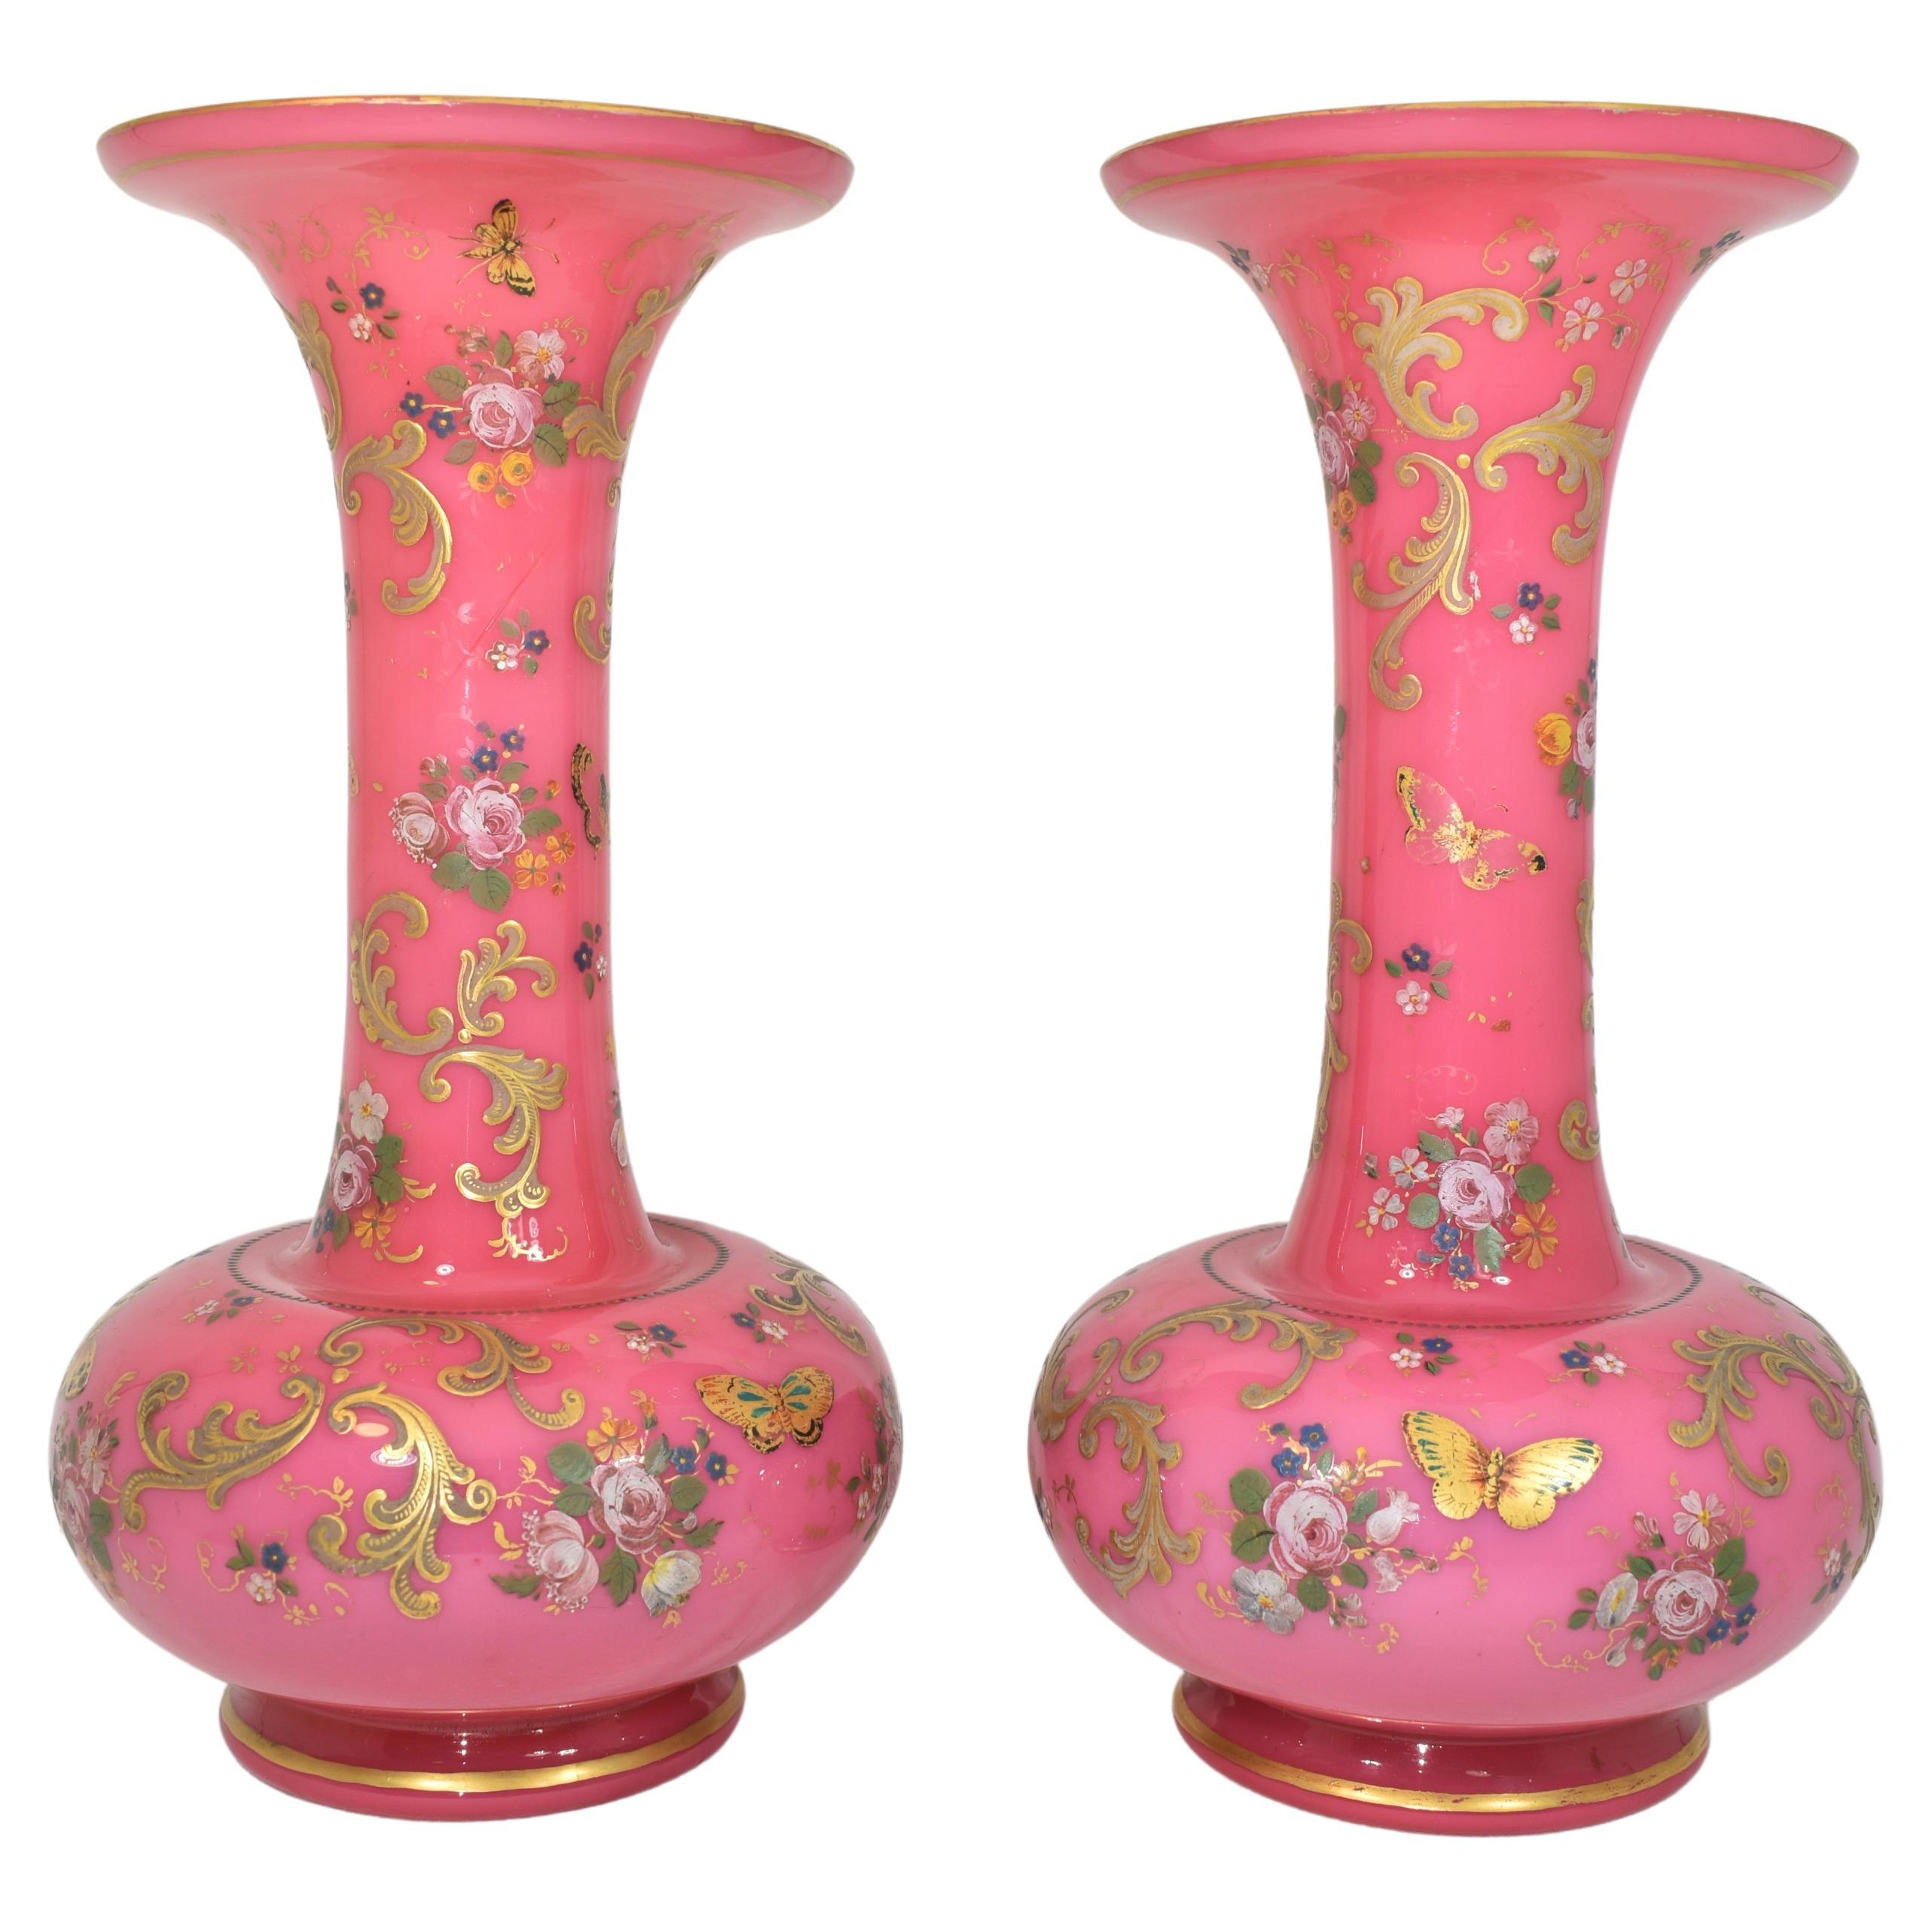 Antique Pair of Pink Opaline Enamelled Galss Vases, 19th Century